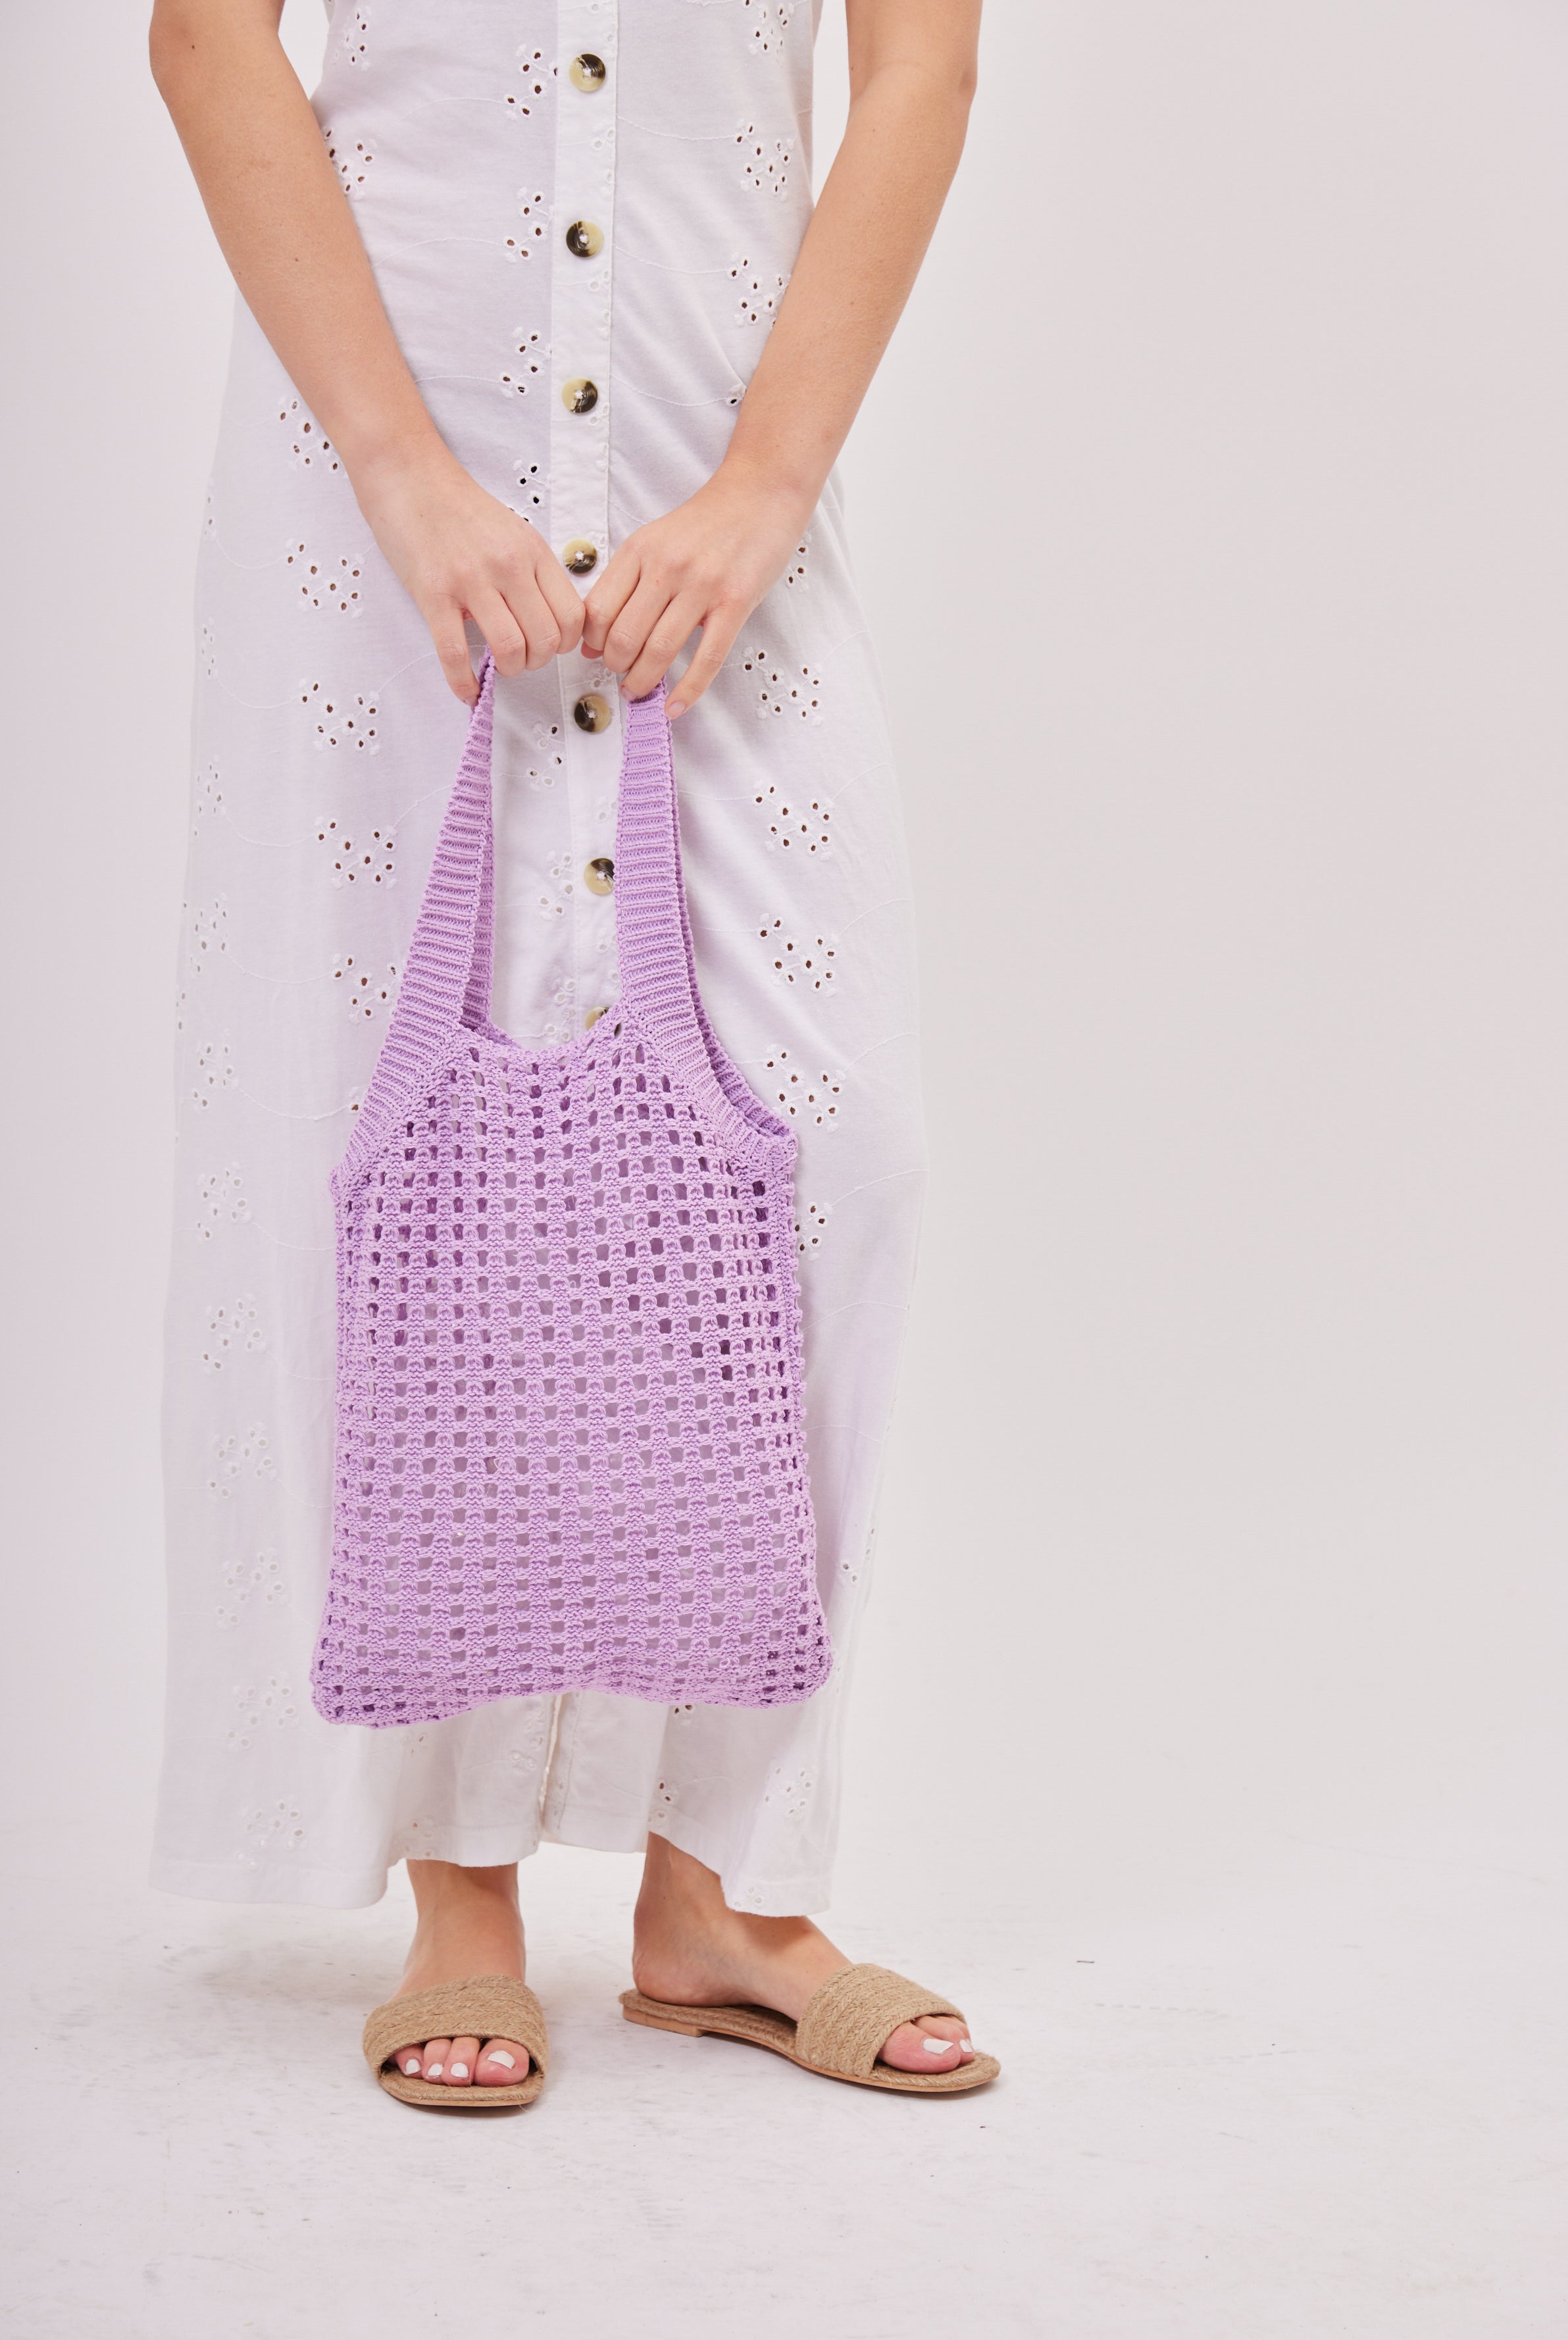 Knitted Crochet Tote in Lilac | Shopper | Bag | Purple | Summer | Festival | Women's Accessories | Women | Knitted |